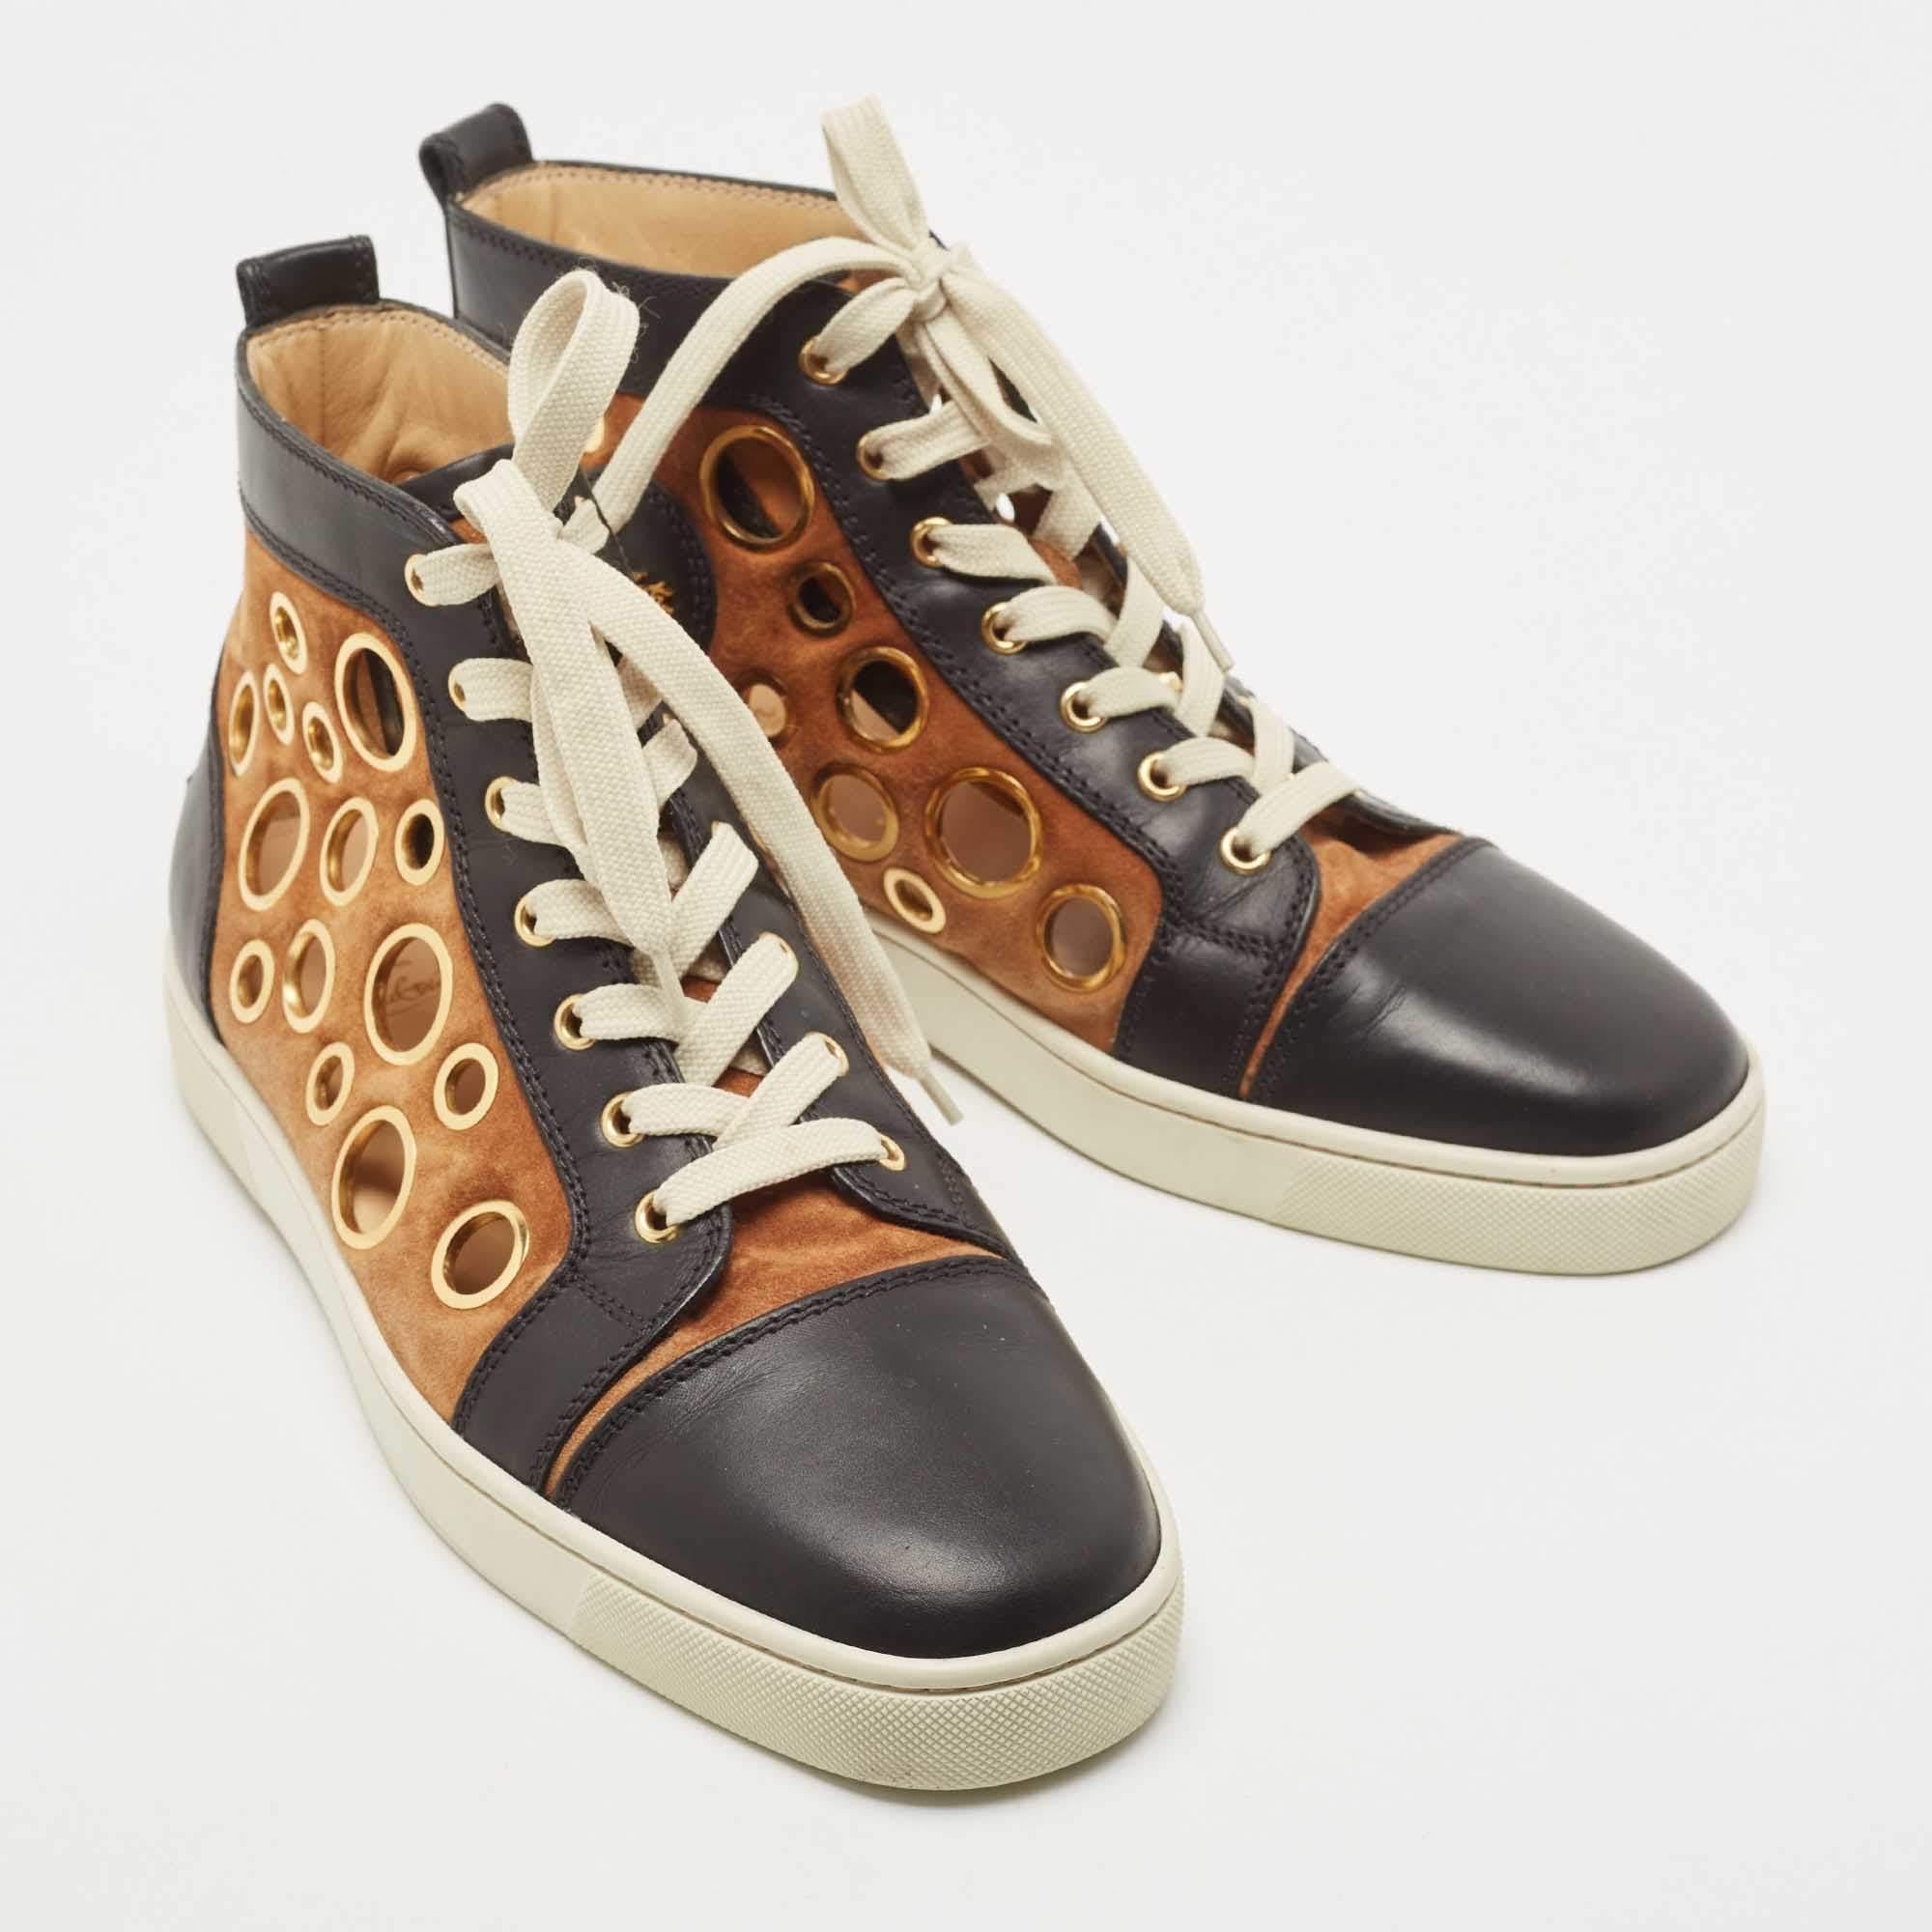 Christian Louboutin Leather and Suede Laser Cut High Top Sneakers Size 42.5 2